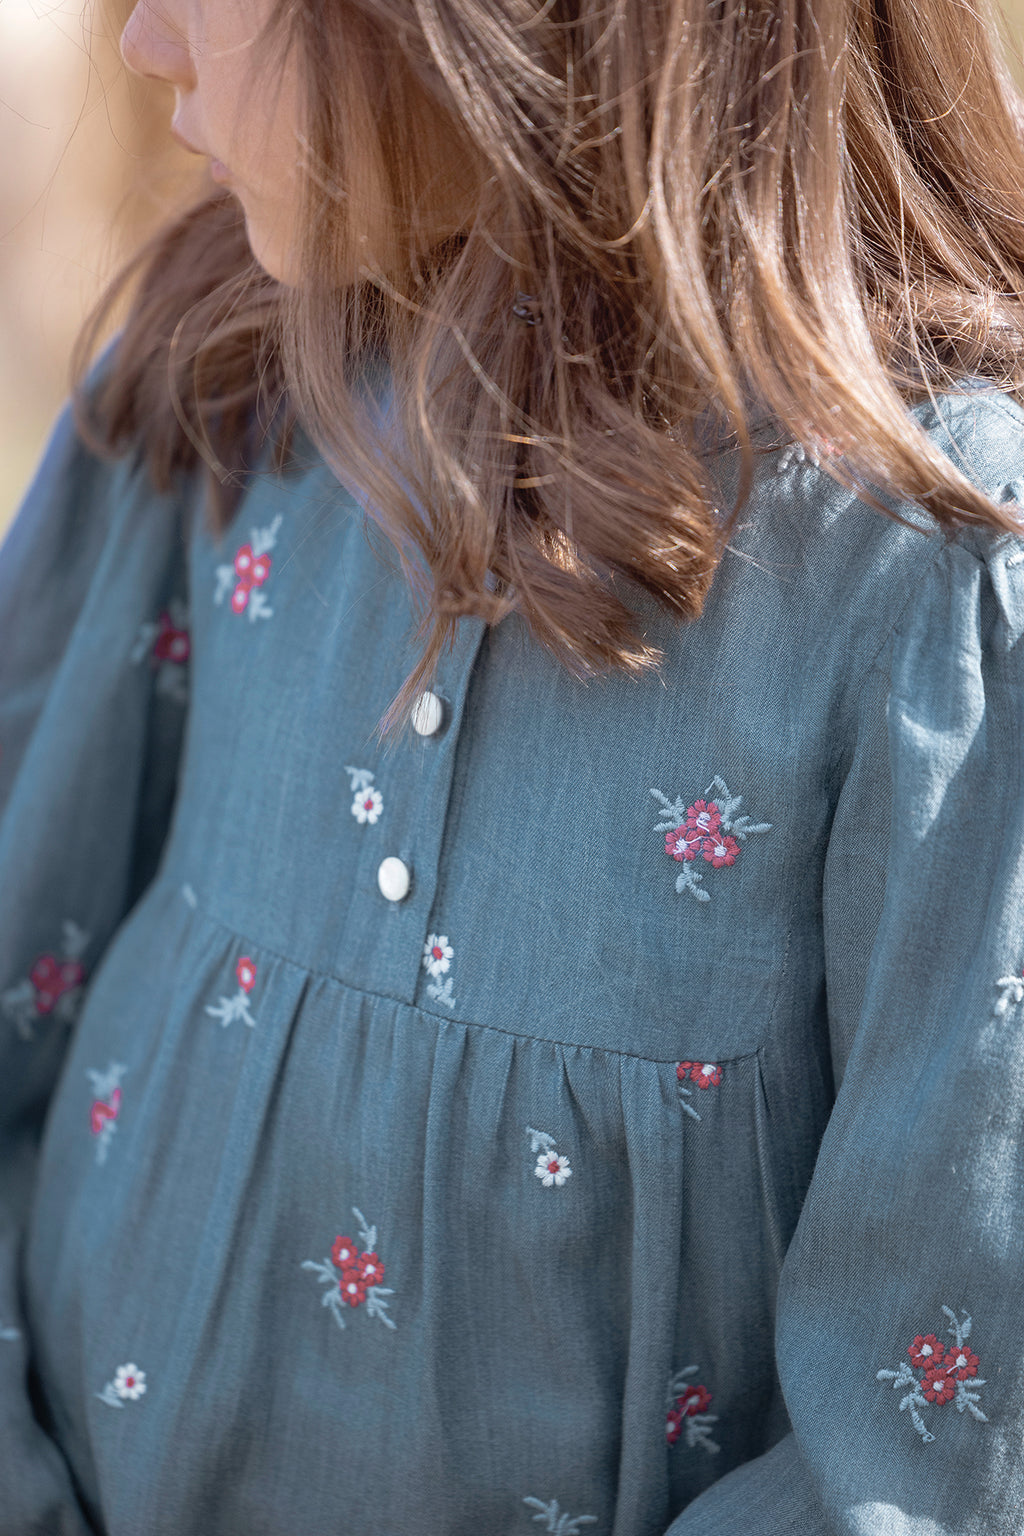 Dress - Blue chambray Embrodery